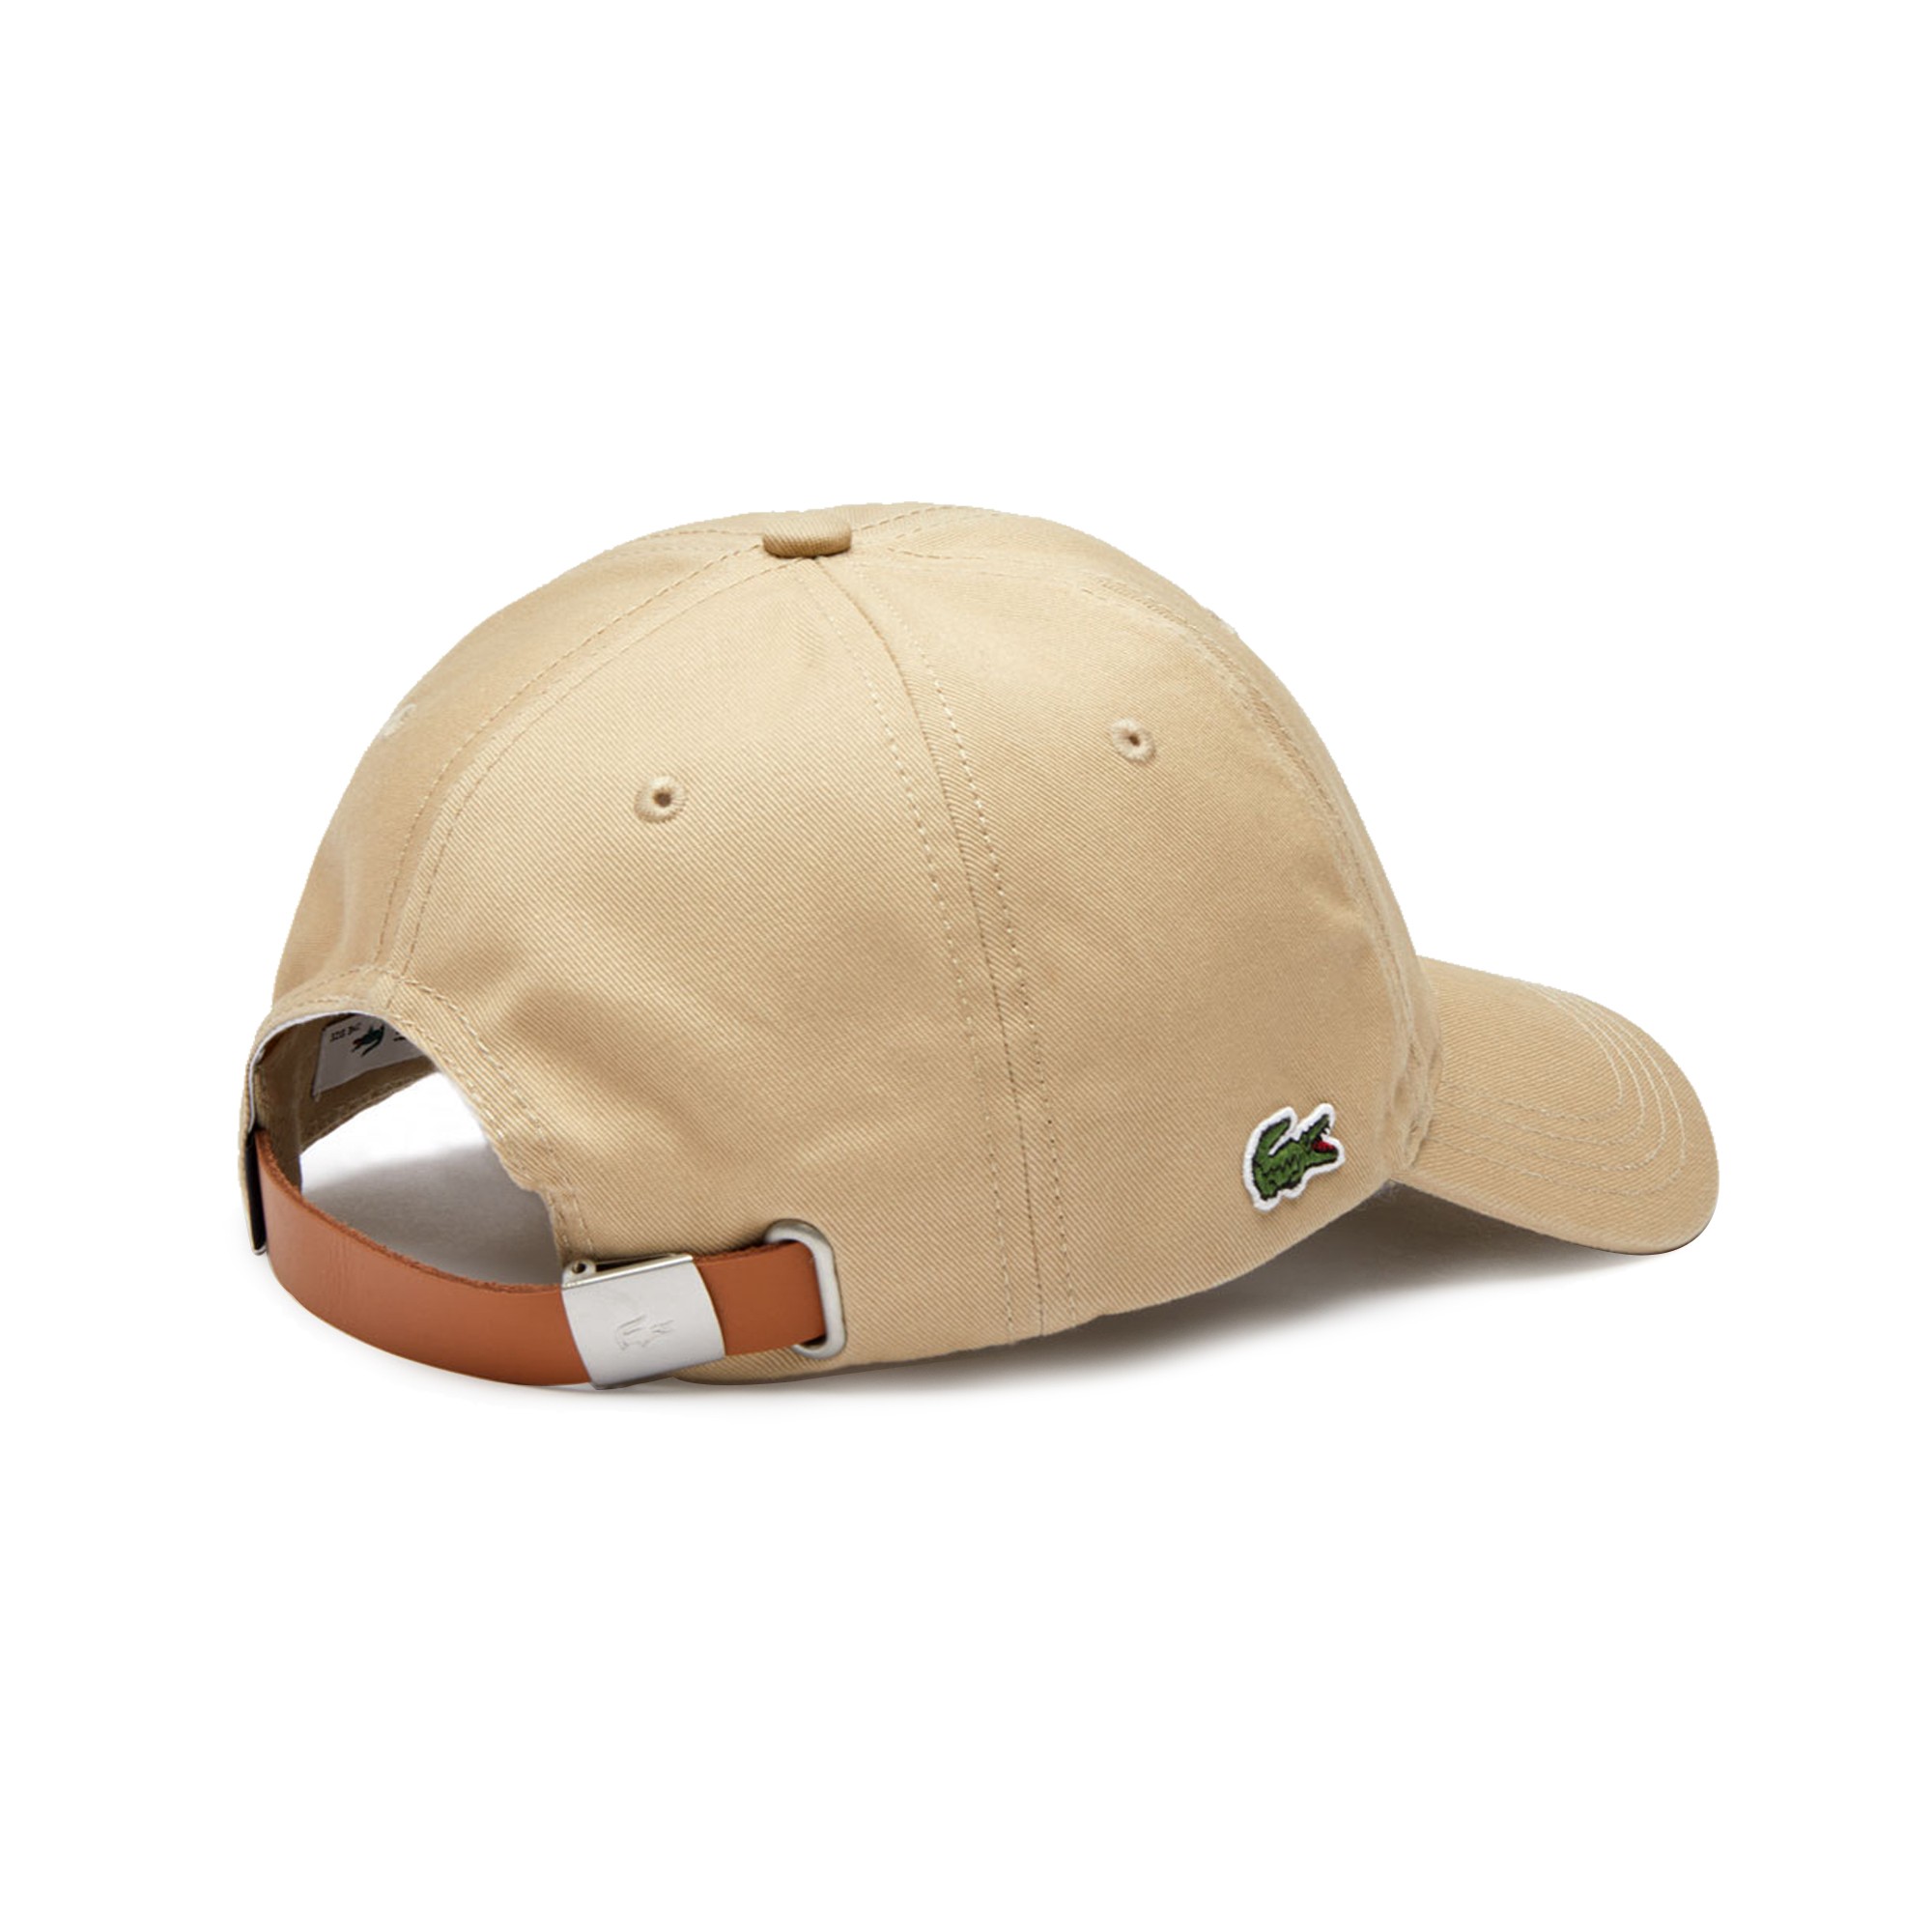 LACOSTE Caps and visors RK4709-00 02S VIENNOIS